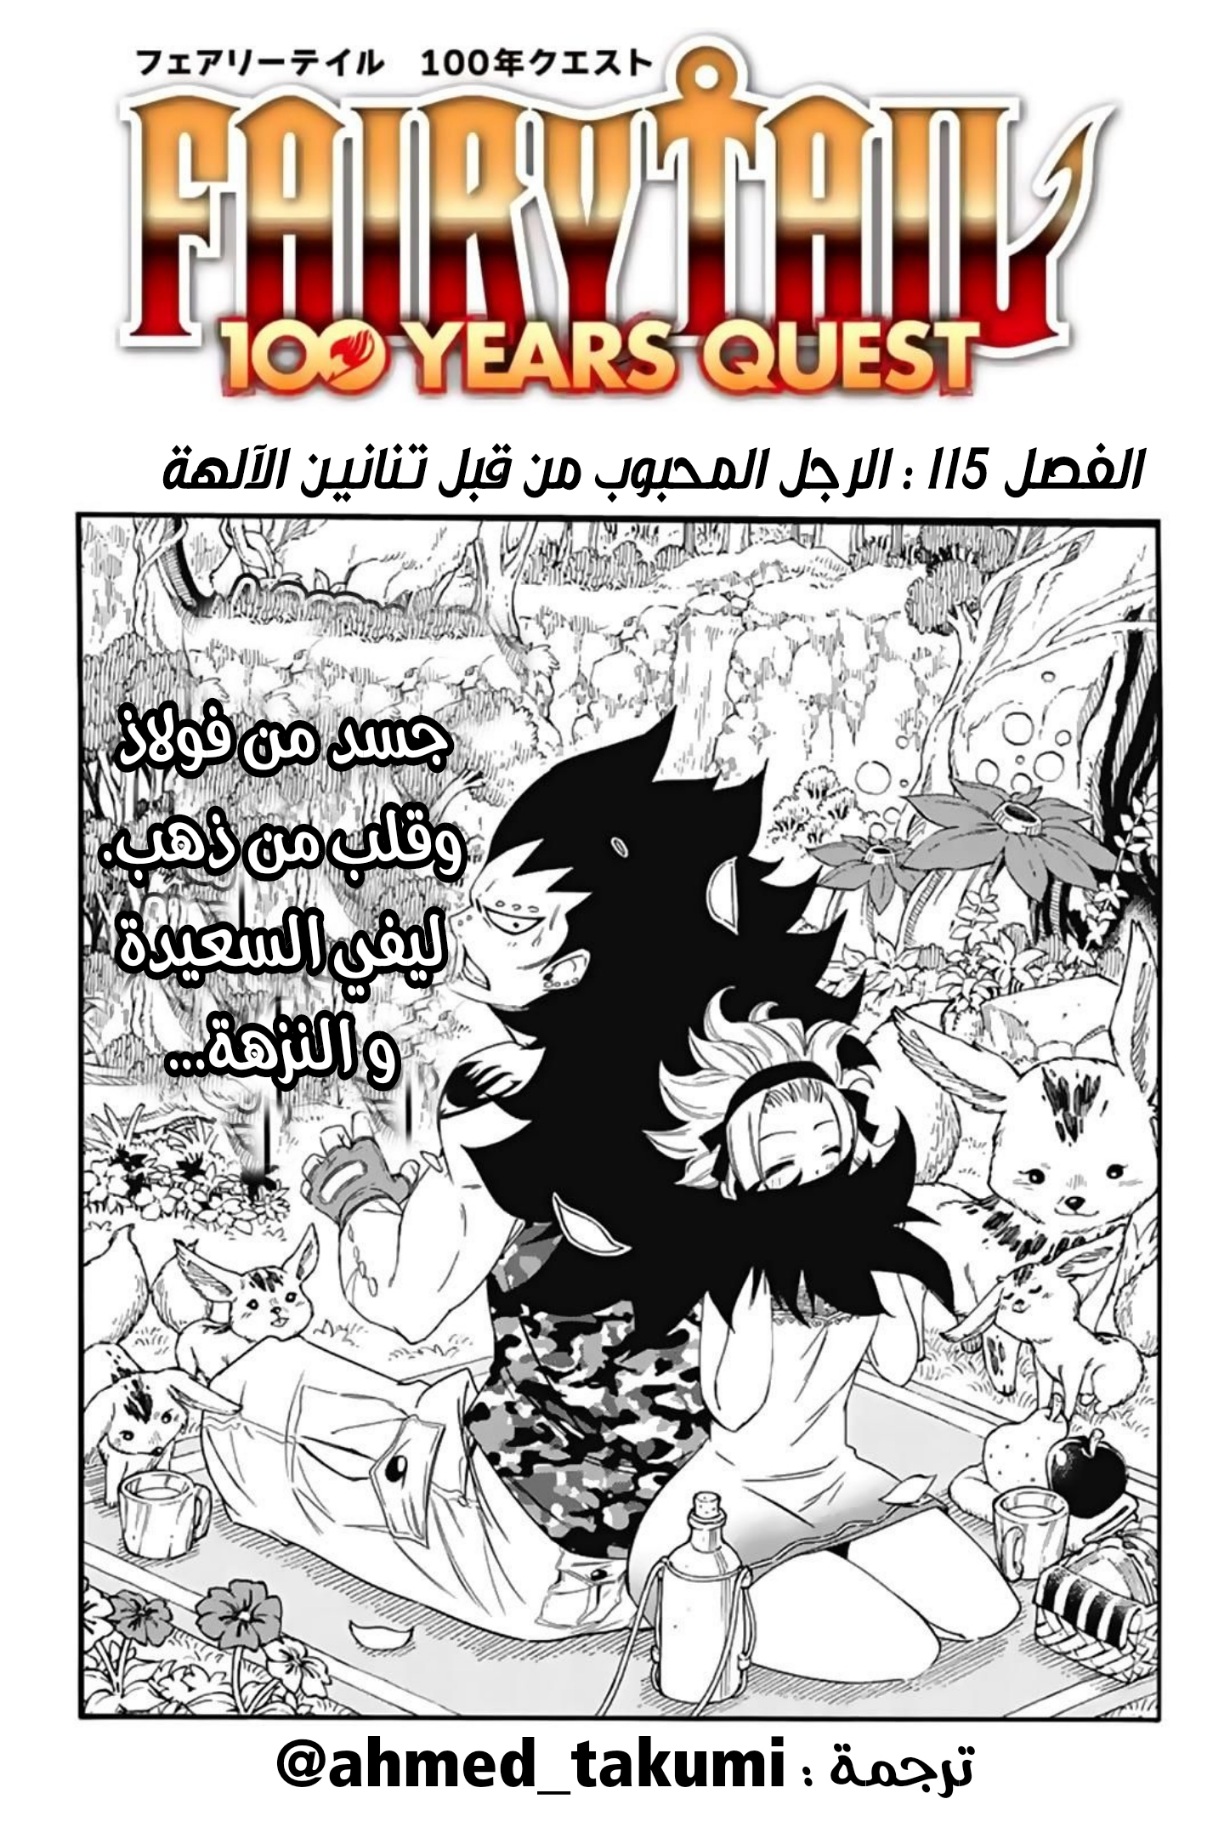 Fairy Tail 100 Years Quest: Chapter 115 - Page 1